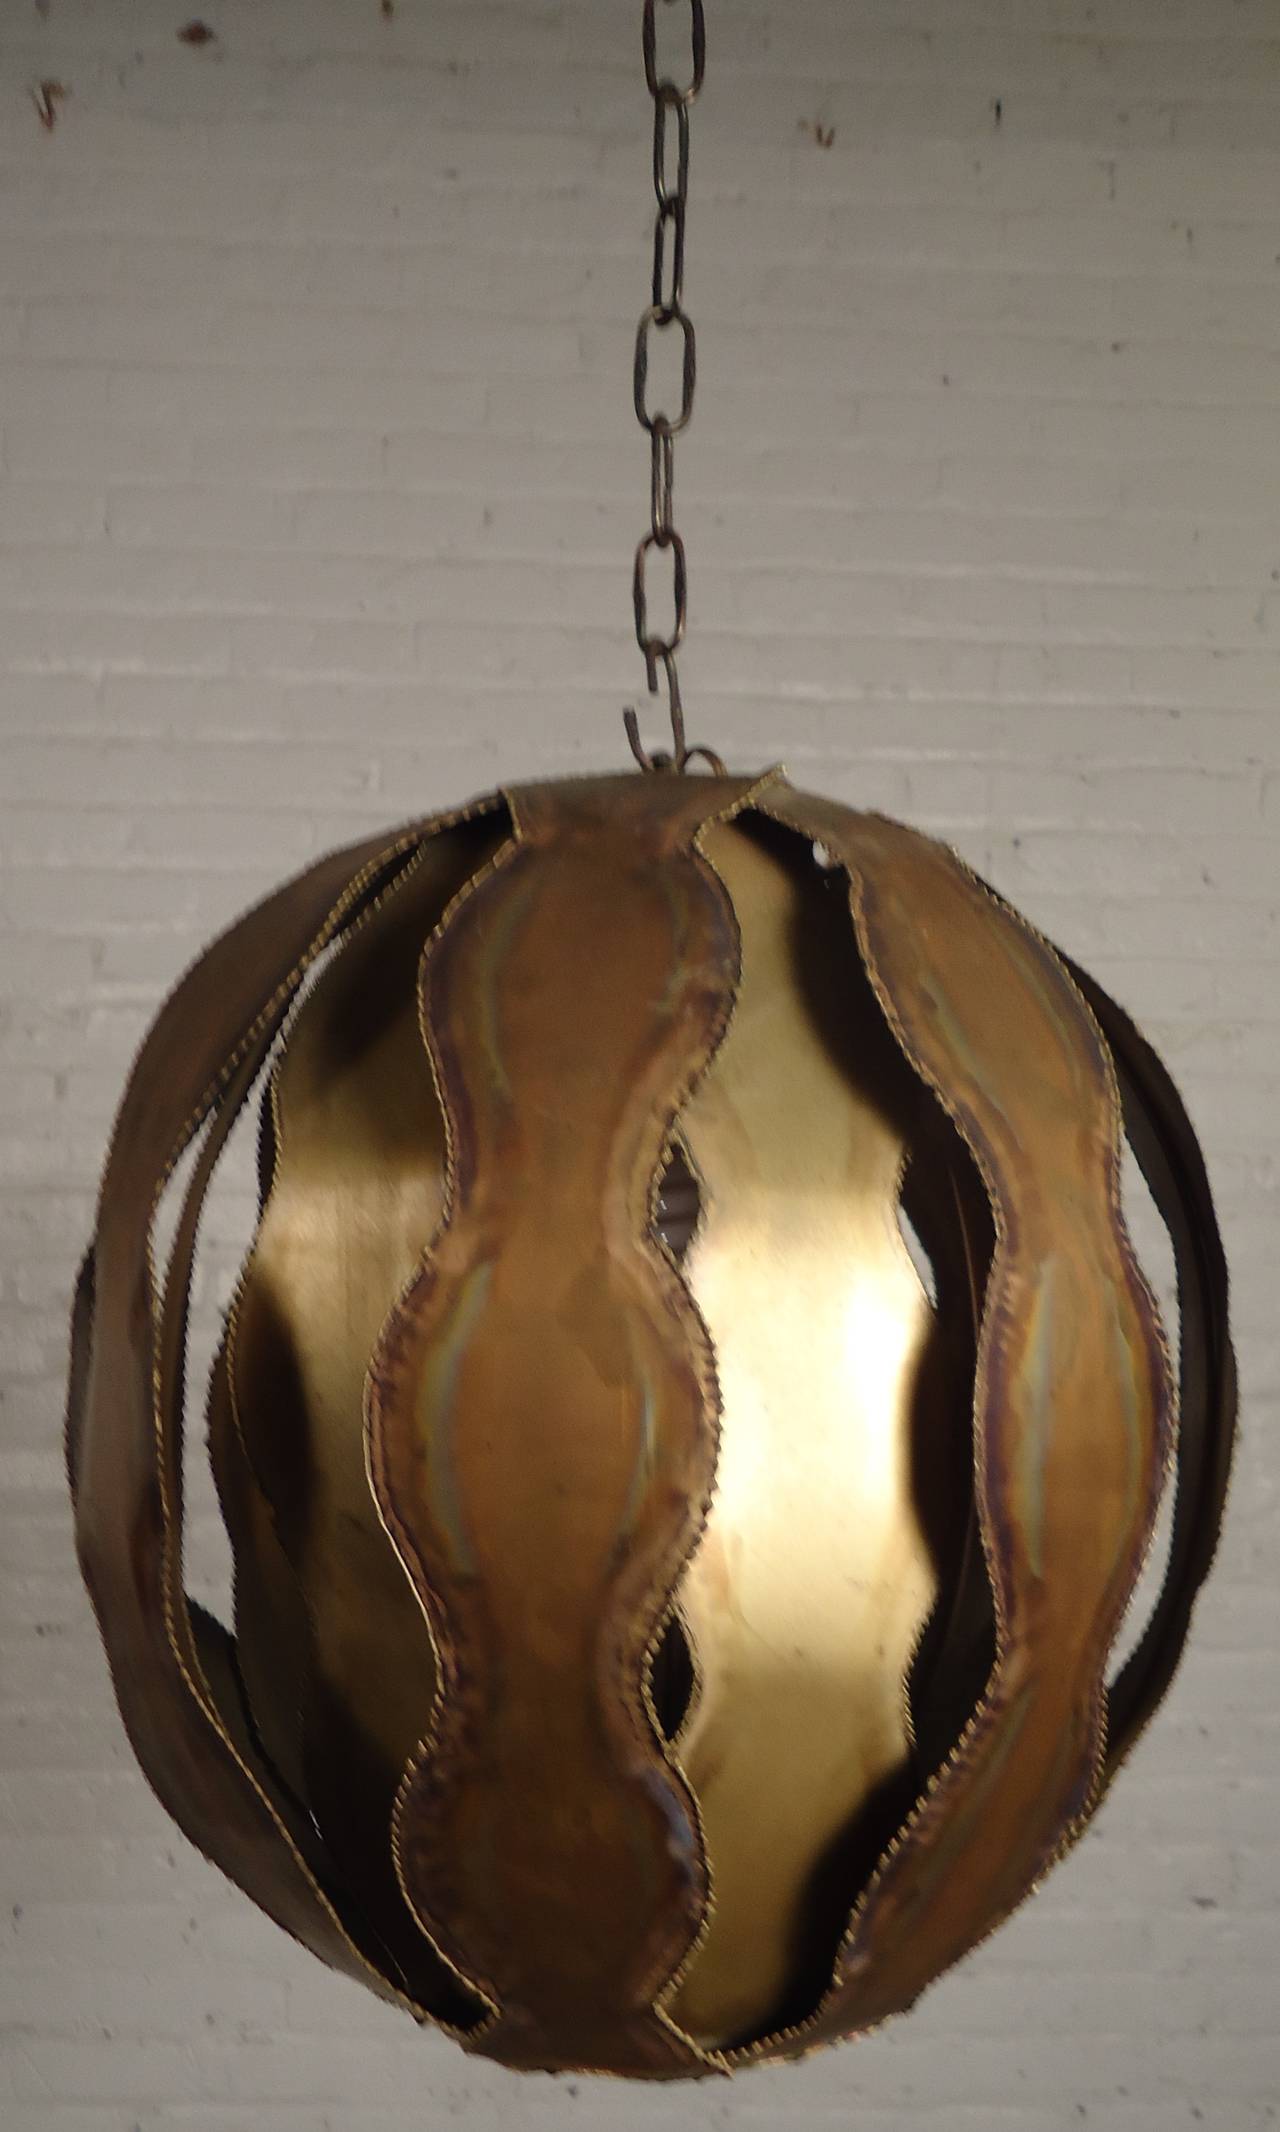 Vintage-Modern brass hanging globe-shaped pendant featuring one standard socket. Awesome torch cut metal with a handsome brutalist finish designed by Tom Greene.

(Please confirm item location - NY or NJ - with dealer)